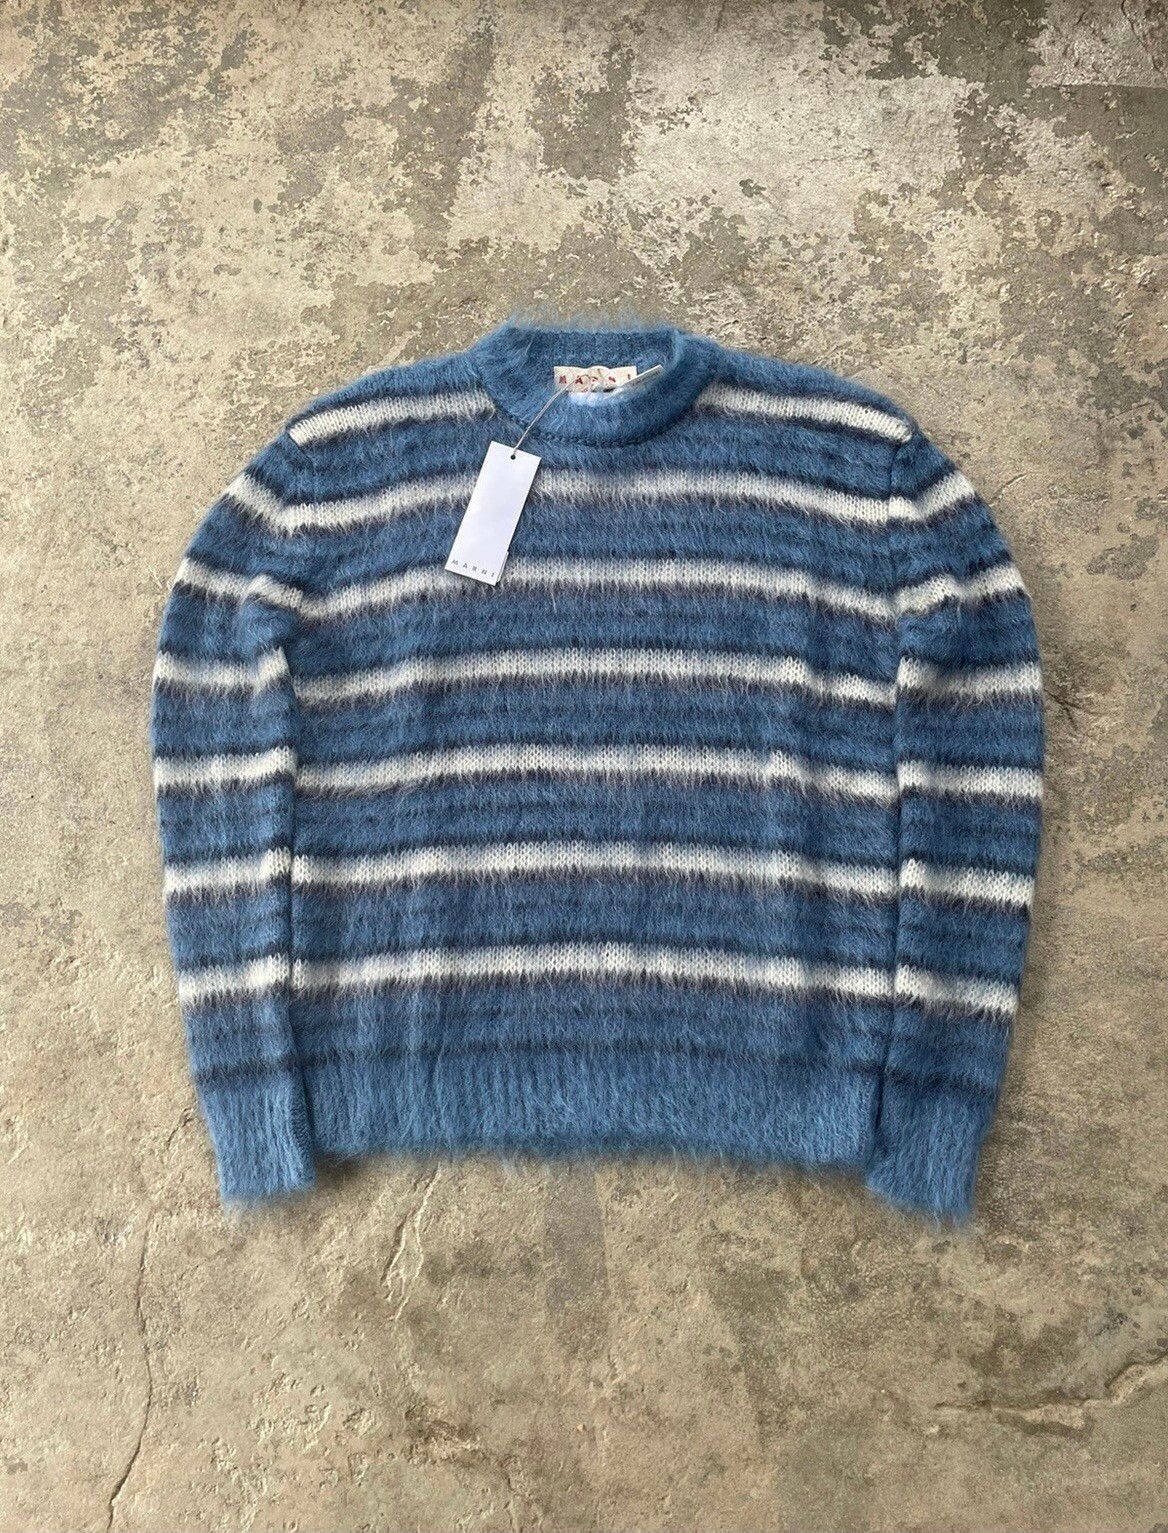 Marni Mohair Sweater in Blue | Grailed